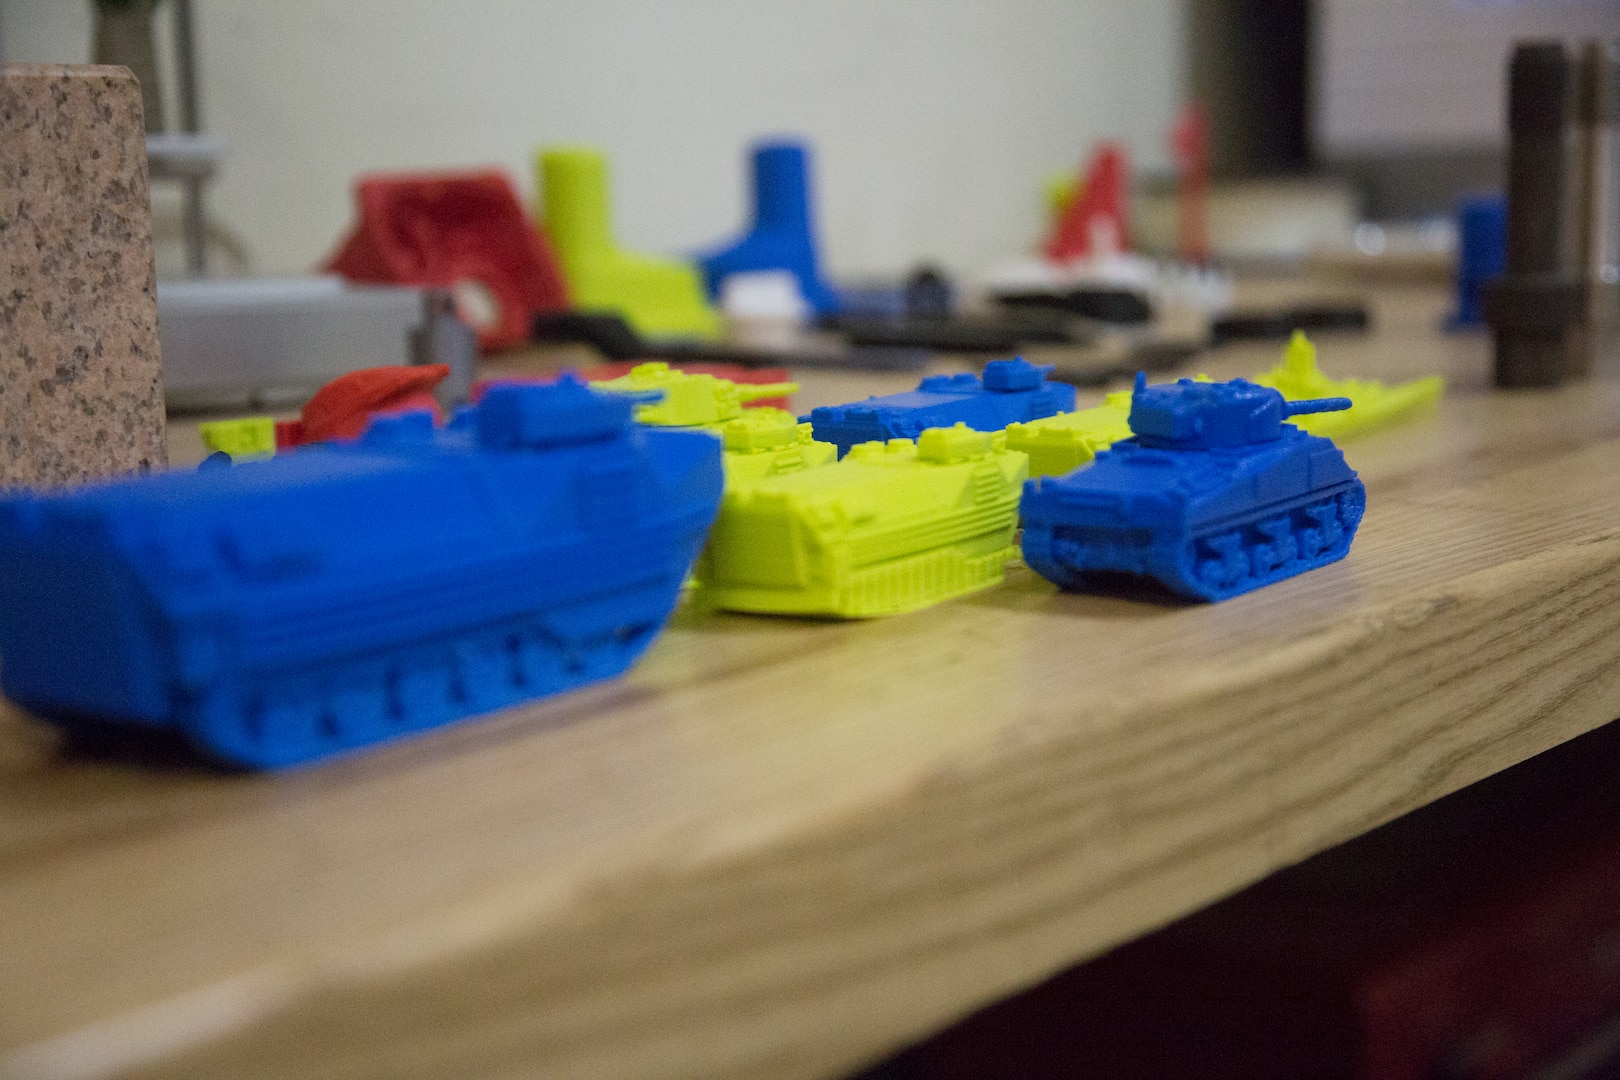 Several 3-D-printed assault vehicle models sit on display in the General Support Maintenance Company (GSM), 3rd Maintenance Battalion, 3rd Marine Logistics Group, as a display of advanced capabilities, Nov. 21 2017, at Camp Kinser, Okinawa, Japan. The Dreamer Flashforge 3-D printer is regularly used at GSM to test form, fit and functionality of equipment and military systems before the finished product is produced out of metal.